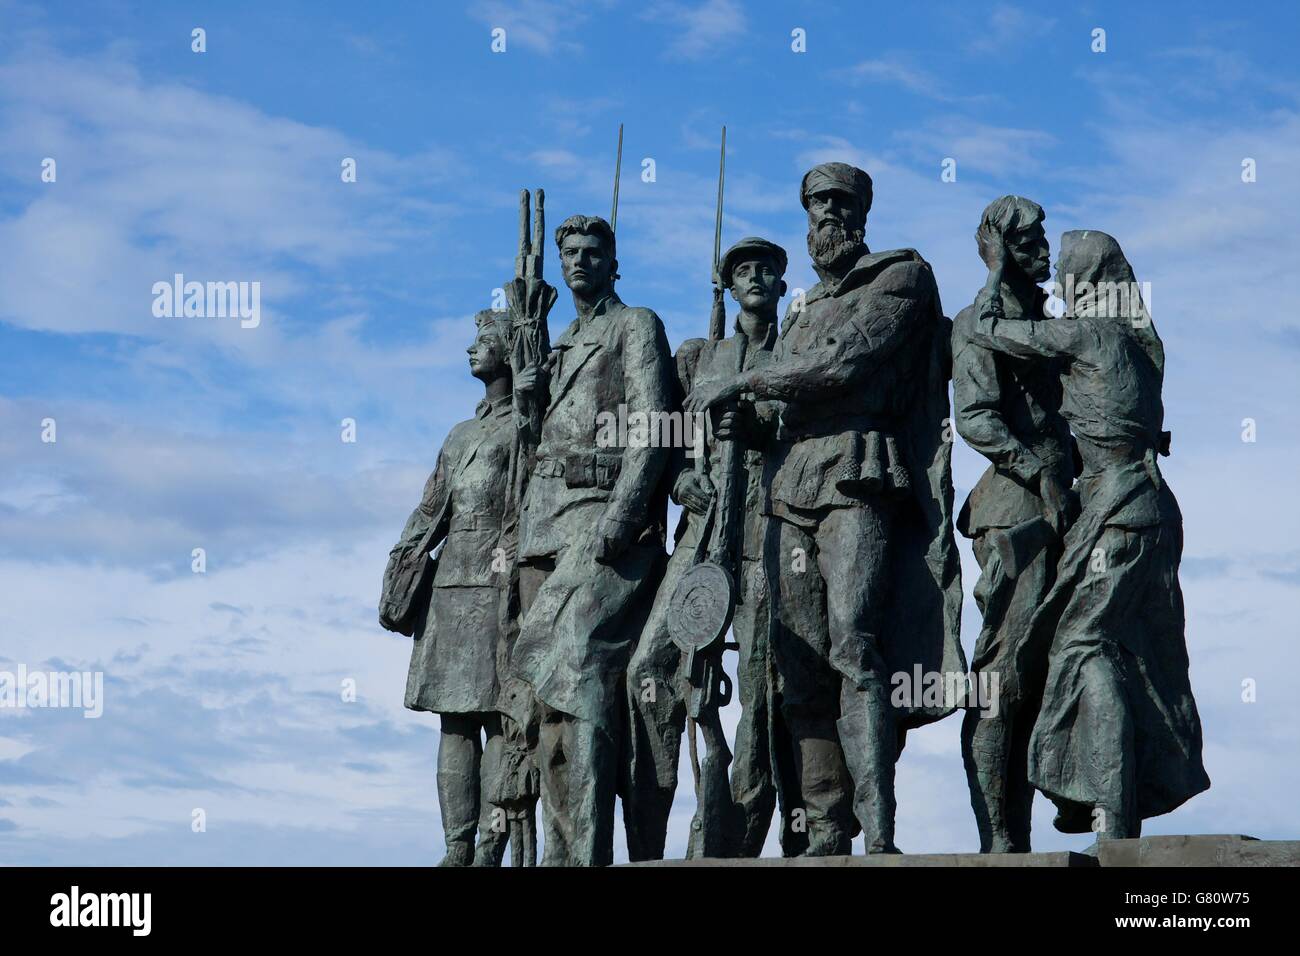 Sculpture of partisans, Monument to the Heroic Defenders of Leningrad, Victory Square, Ploshchad Pobedy, St Petersburg, Russia Stock Photo